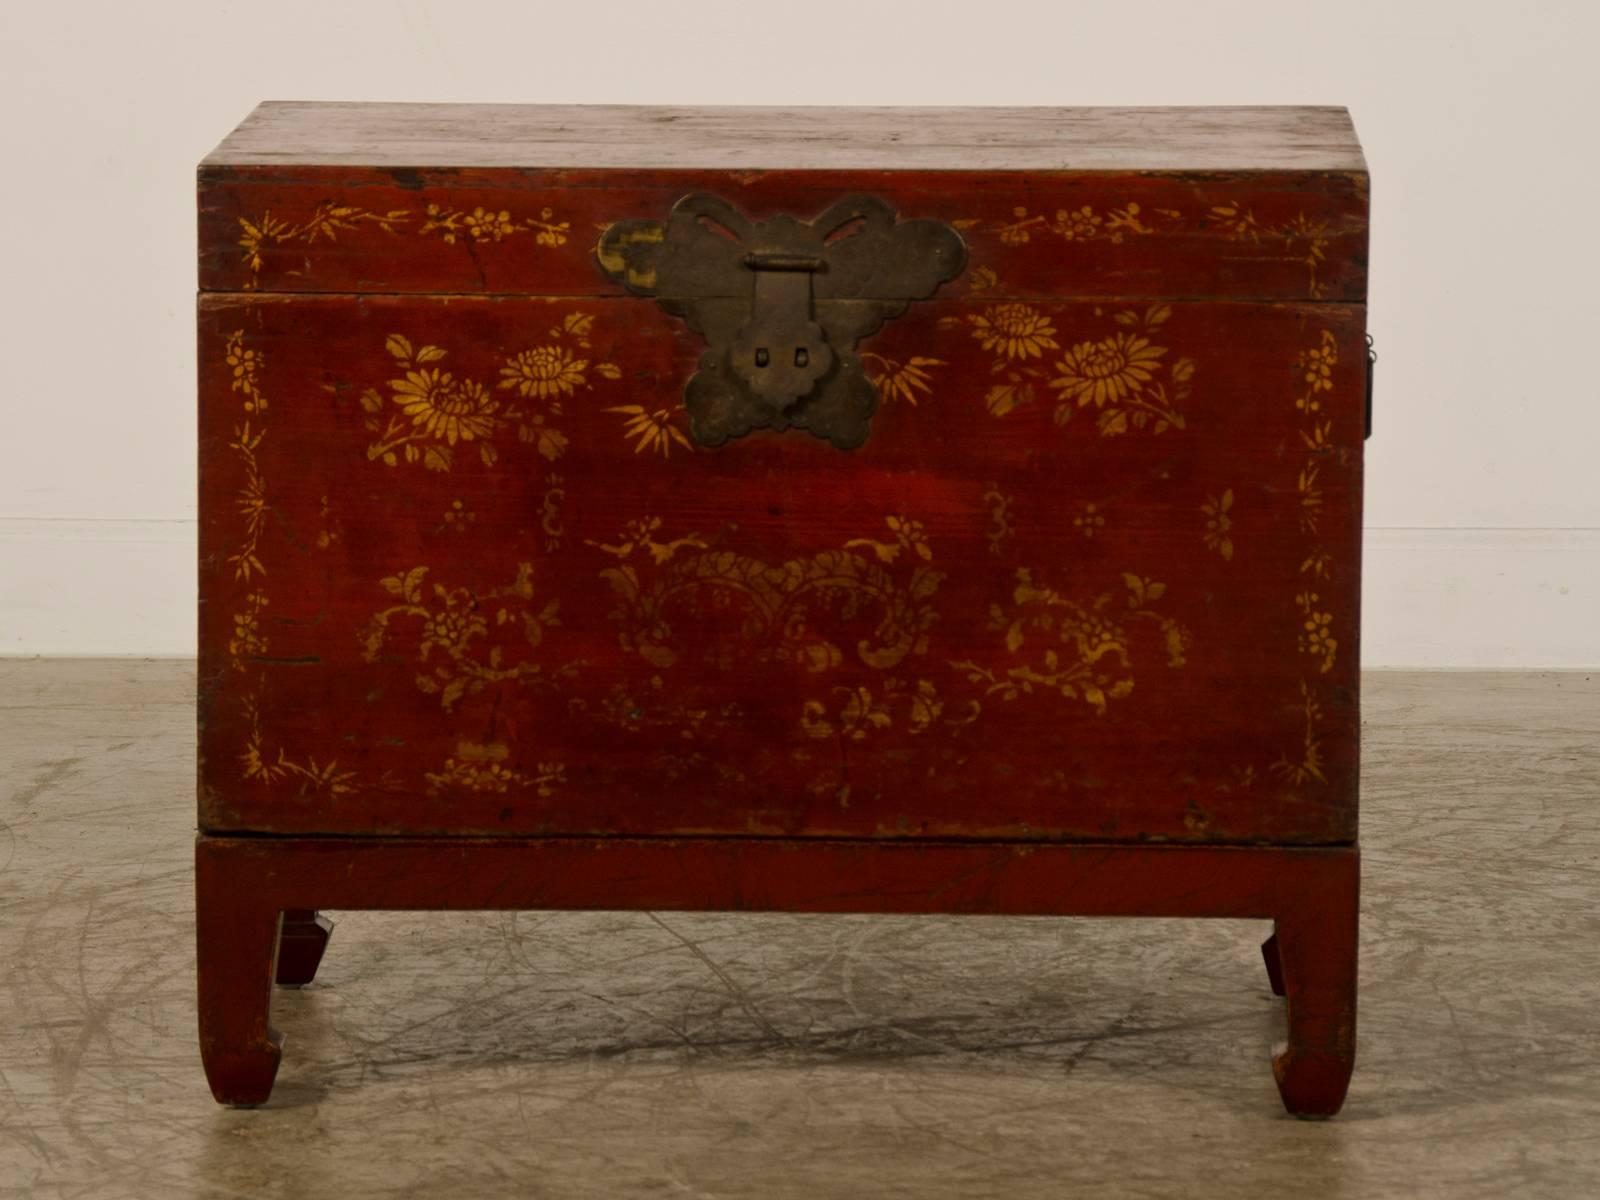 Lacquered Antique Chinese Red Lacquer Trunk with Gold Decoration, circa 1875